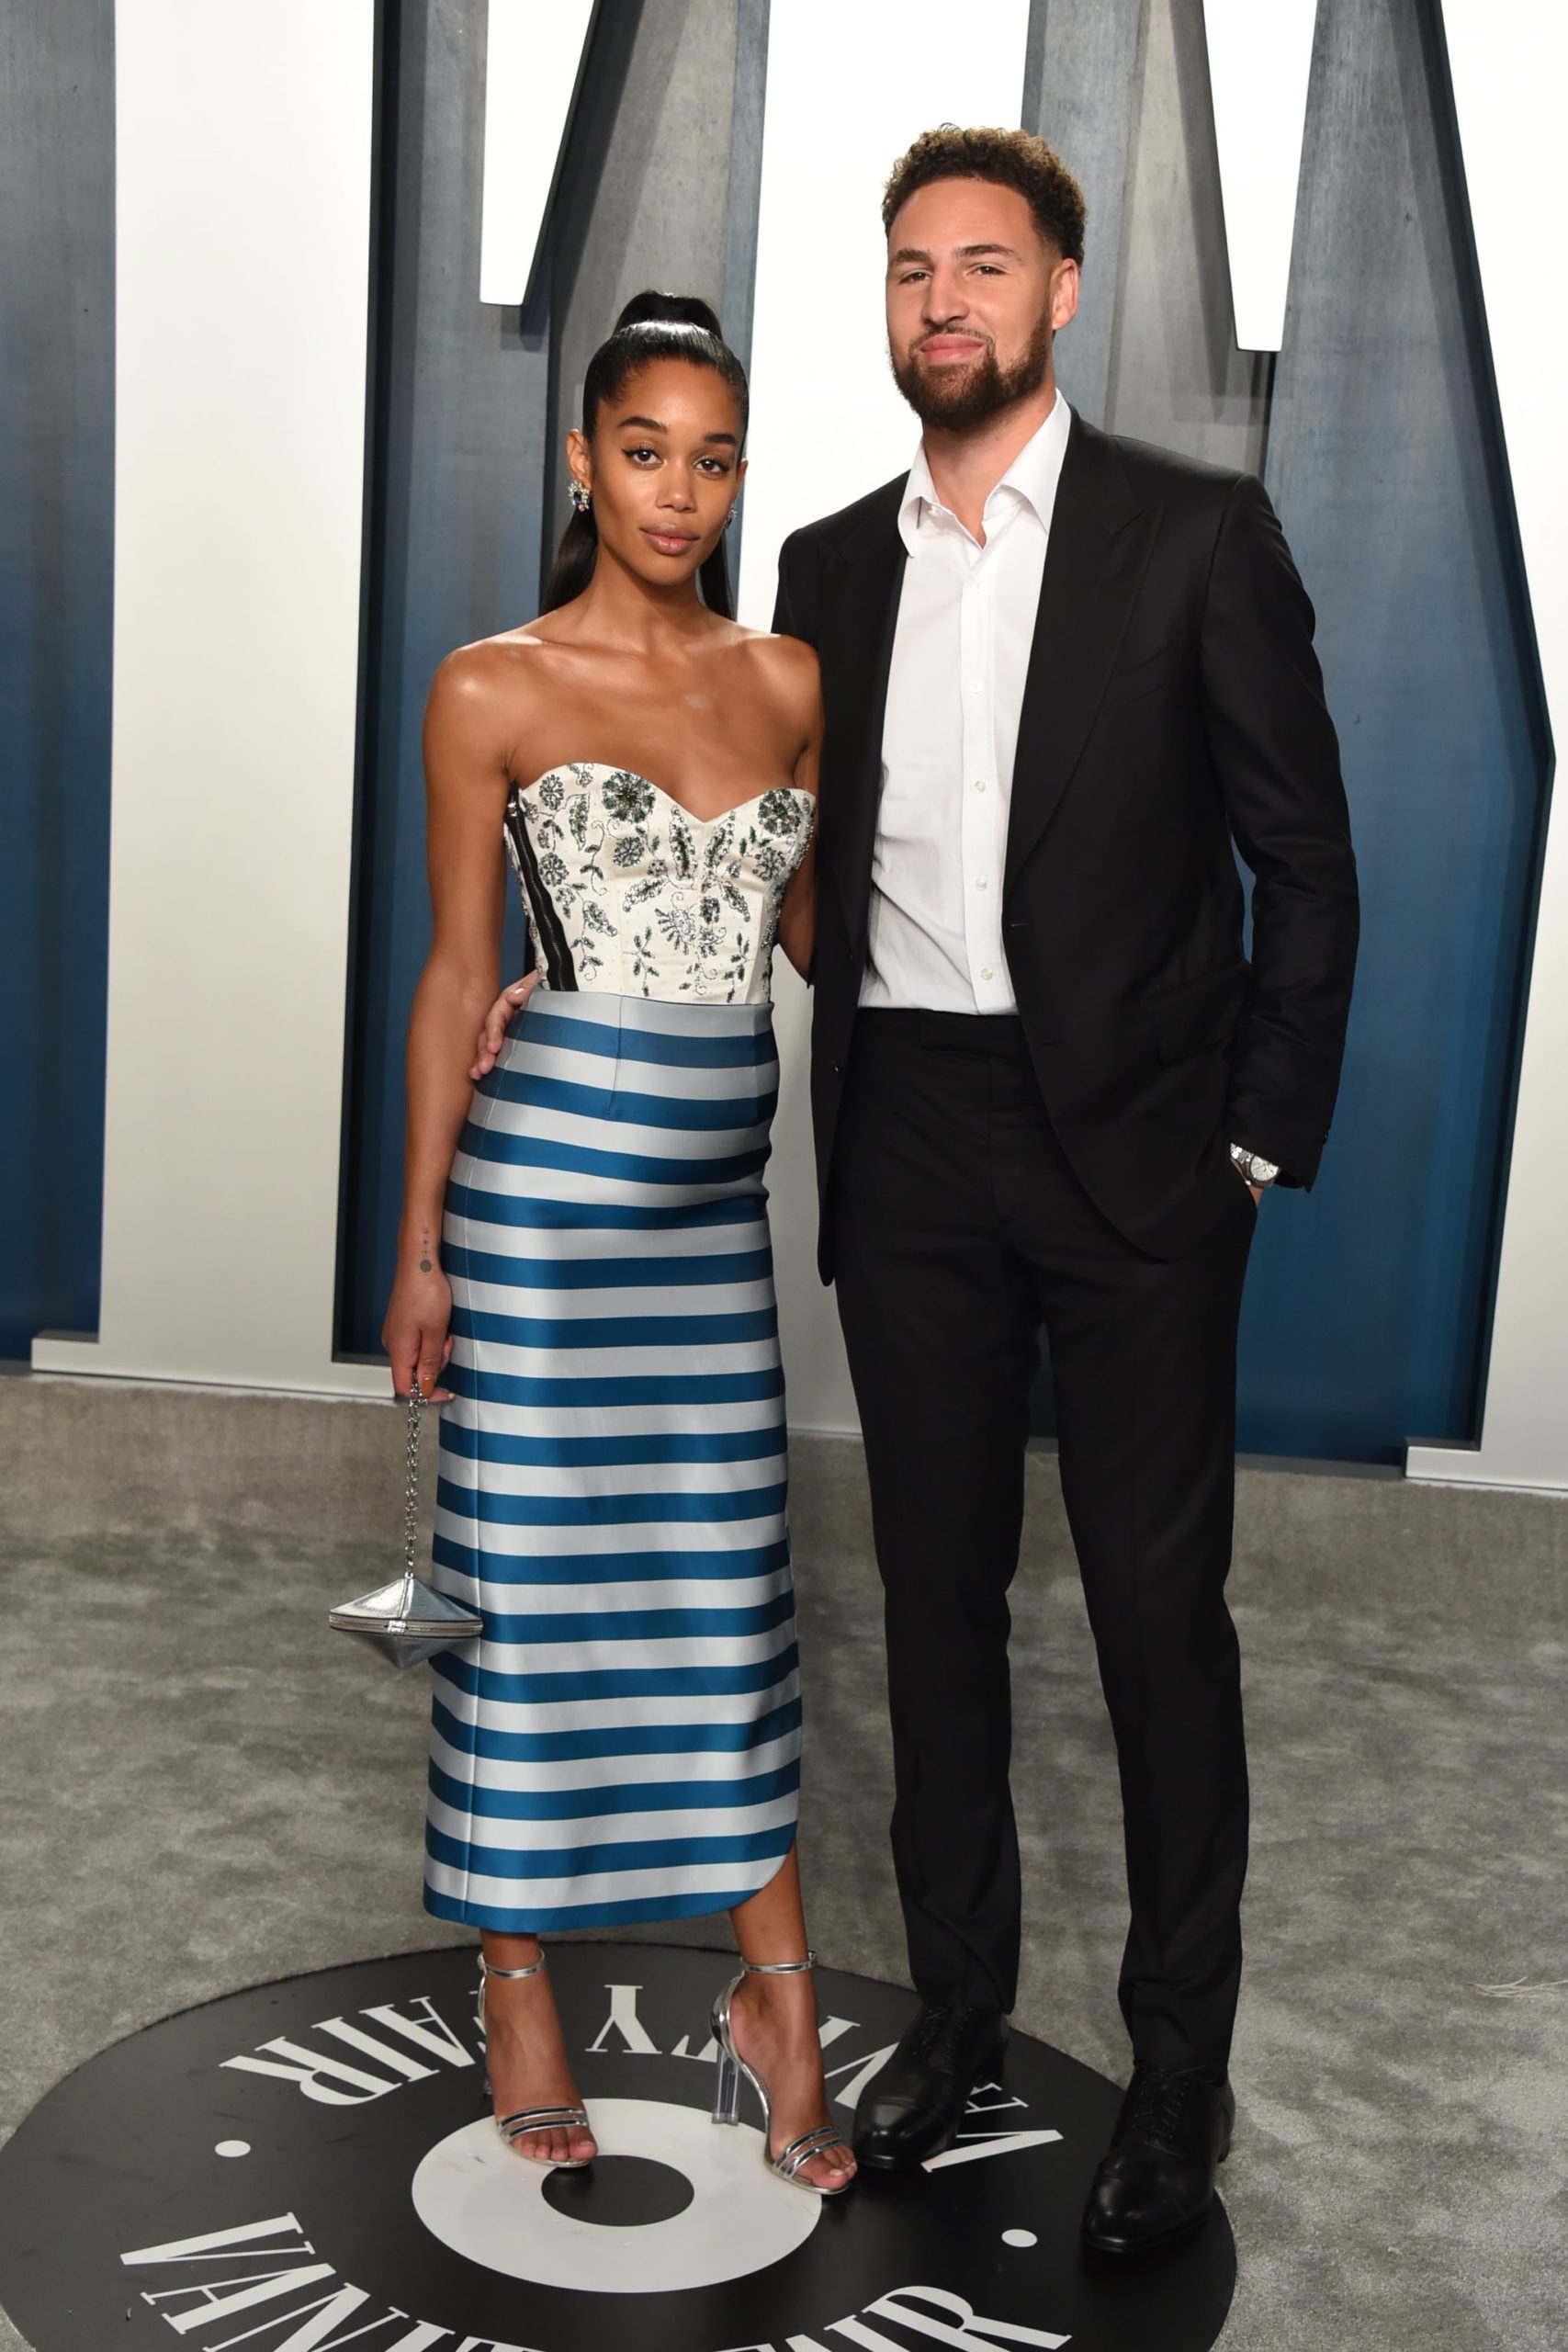 BEVERLY HILLS, CALIFORNIA - FEBRUARY 09: Laura Harrier (L) and Klay Thompson attend the 2020 Vanity Fair Oscar Party hosted by Radhika Jones at Wallis Annenberg Center for the Performing Arts on February 09, 2020 in Beverly Hills, California. (Photo by John Shearer/Getty Images)